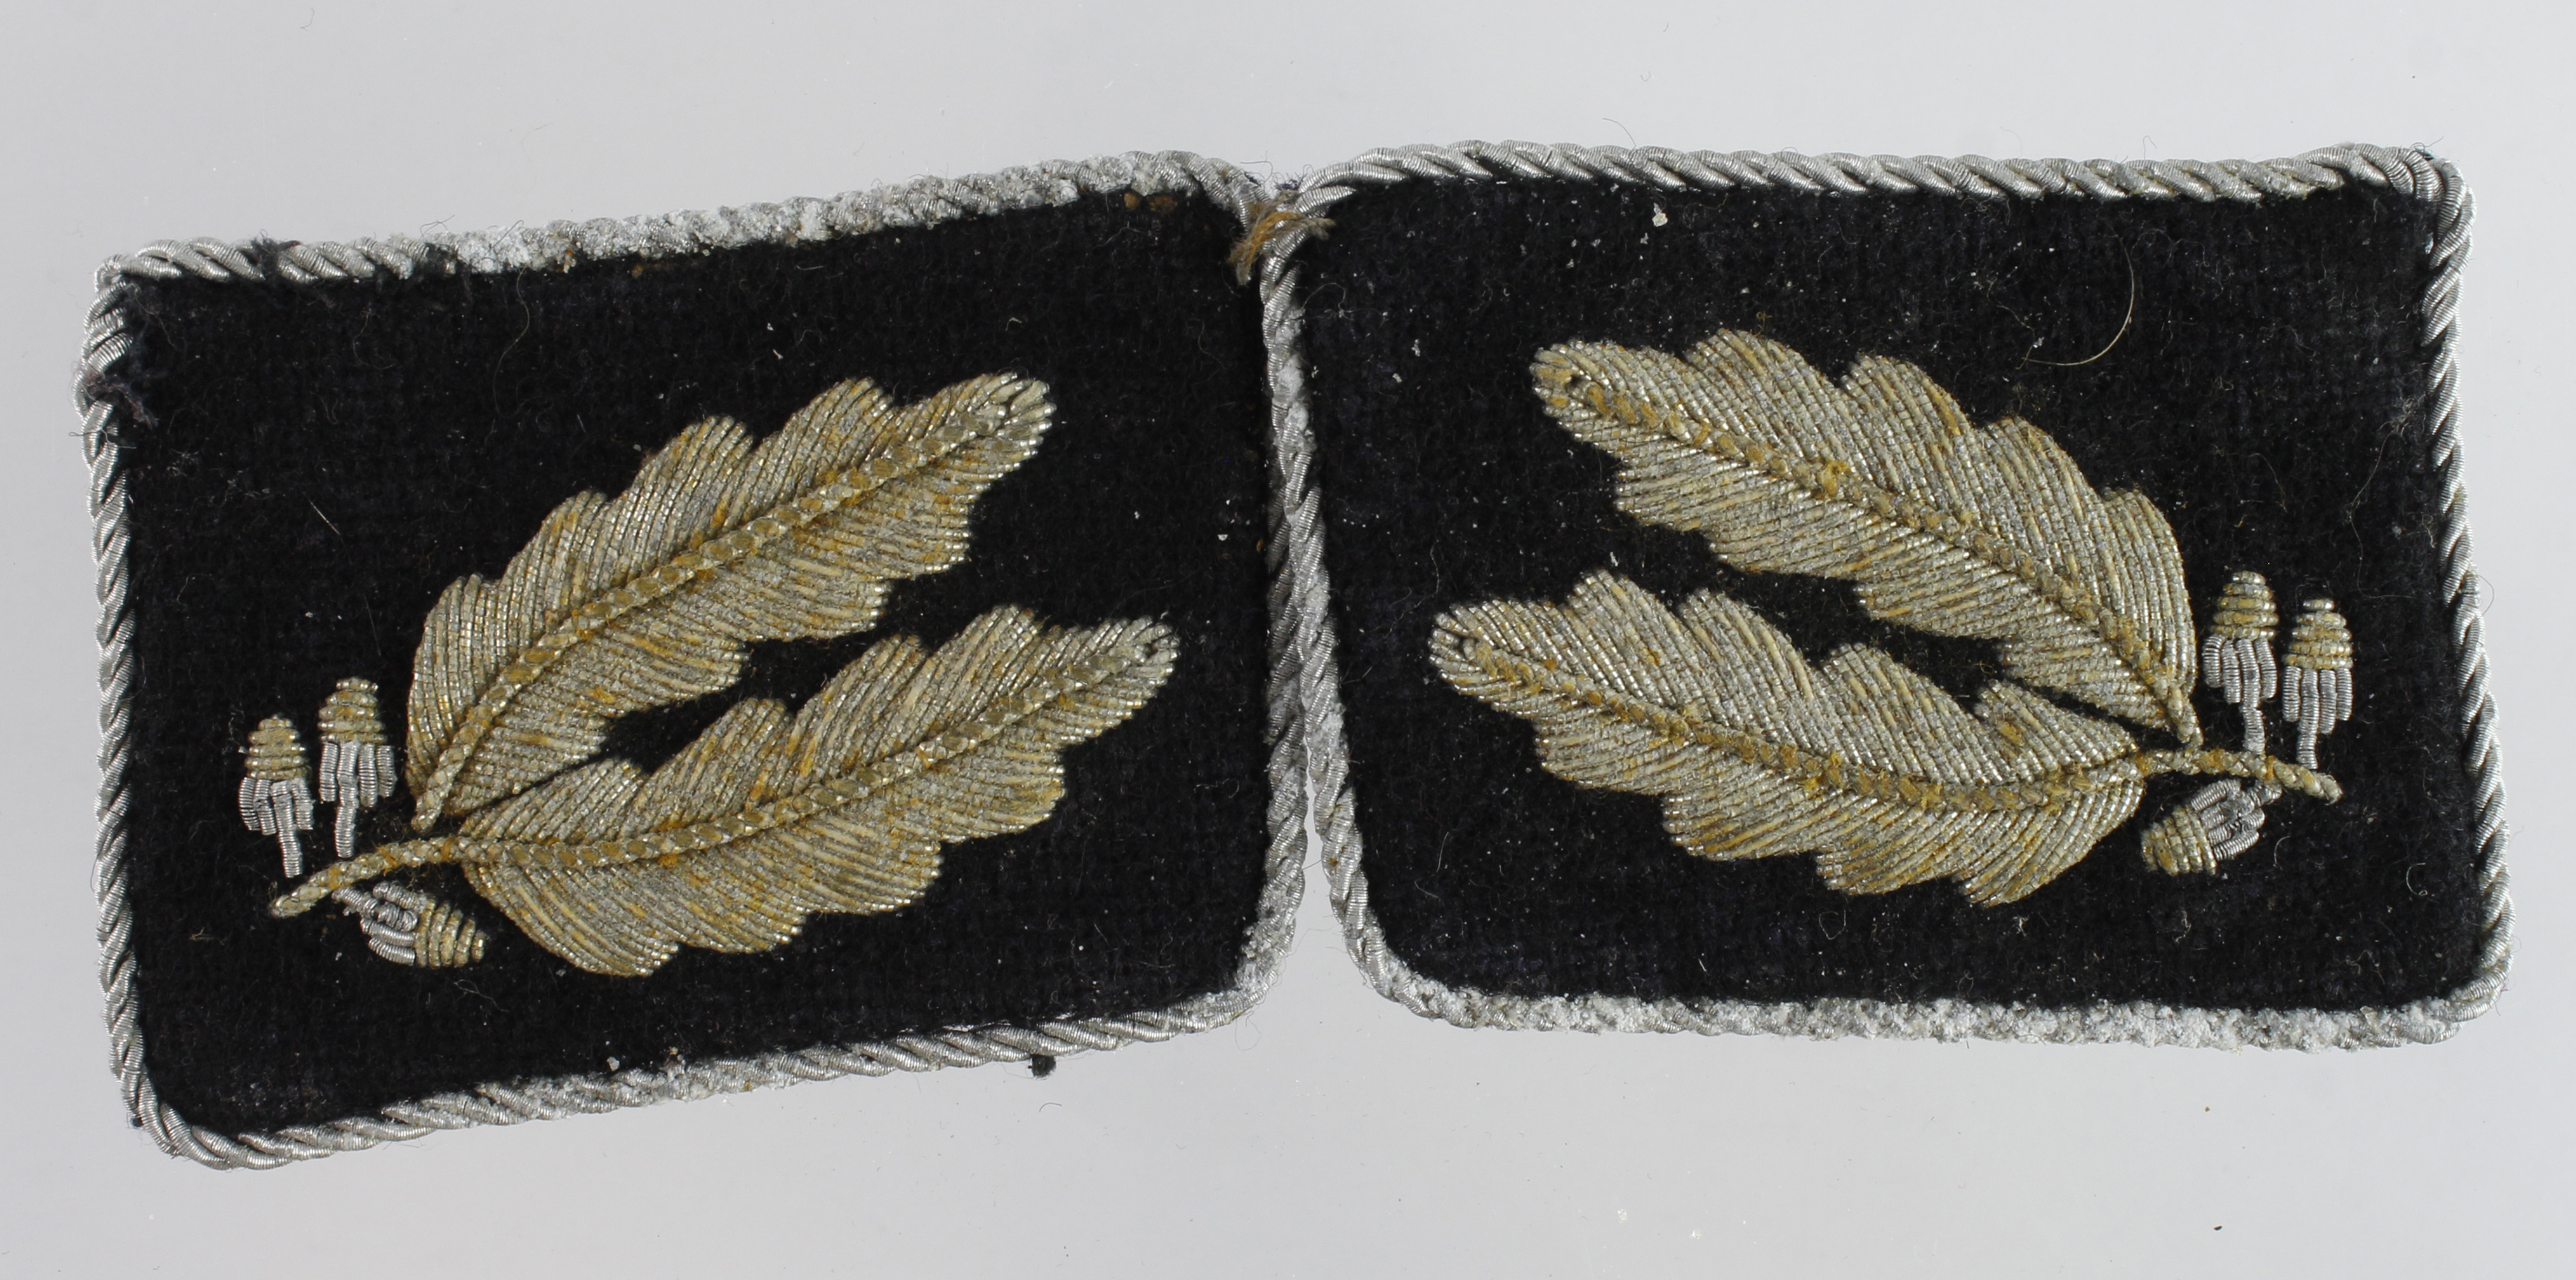 German SS OBERFUHRER pair of collar tabs with paper manufacturers paper labels on the back.